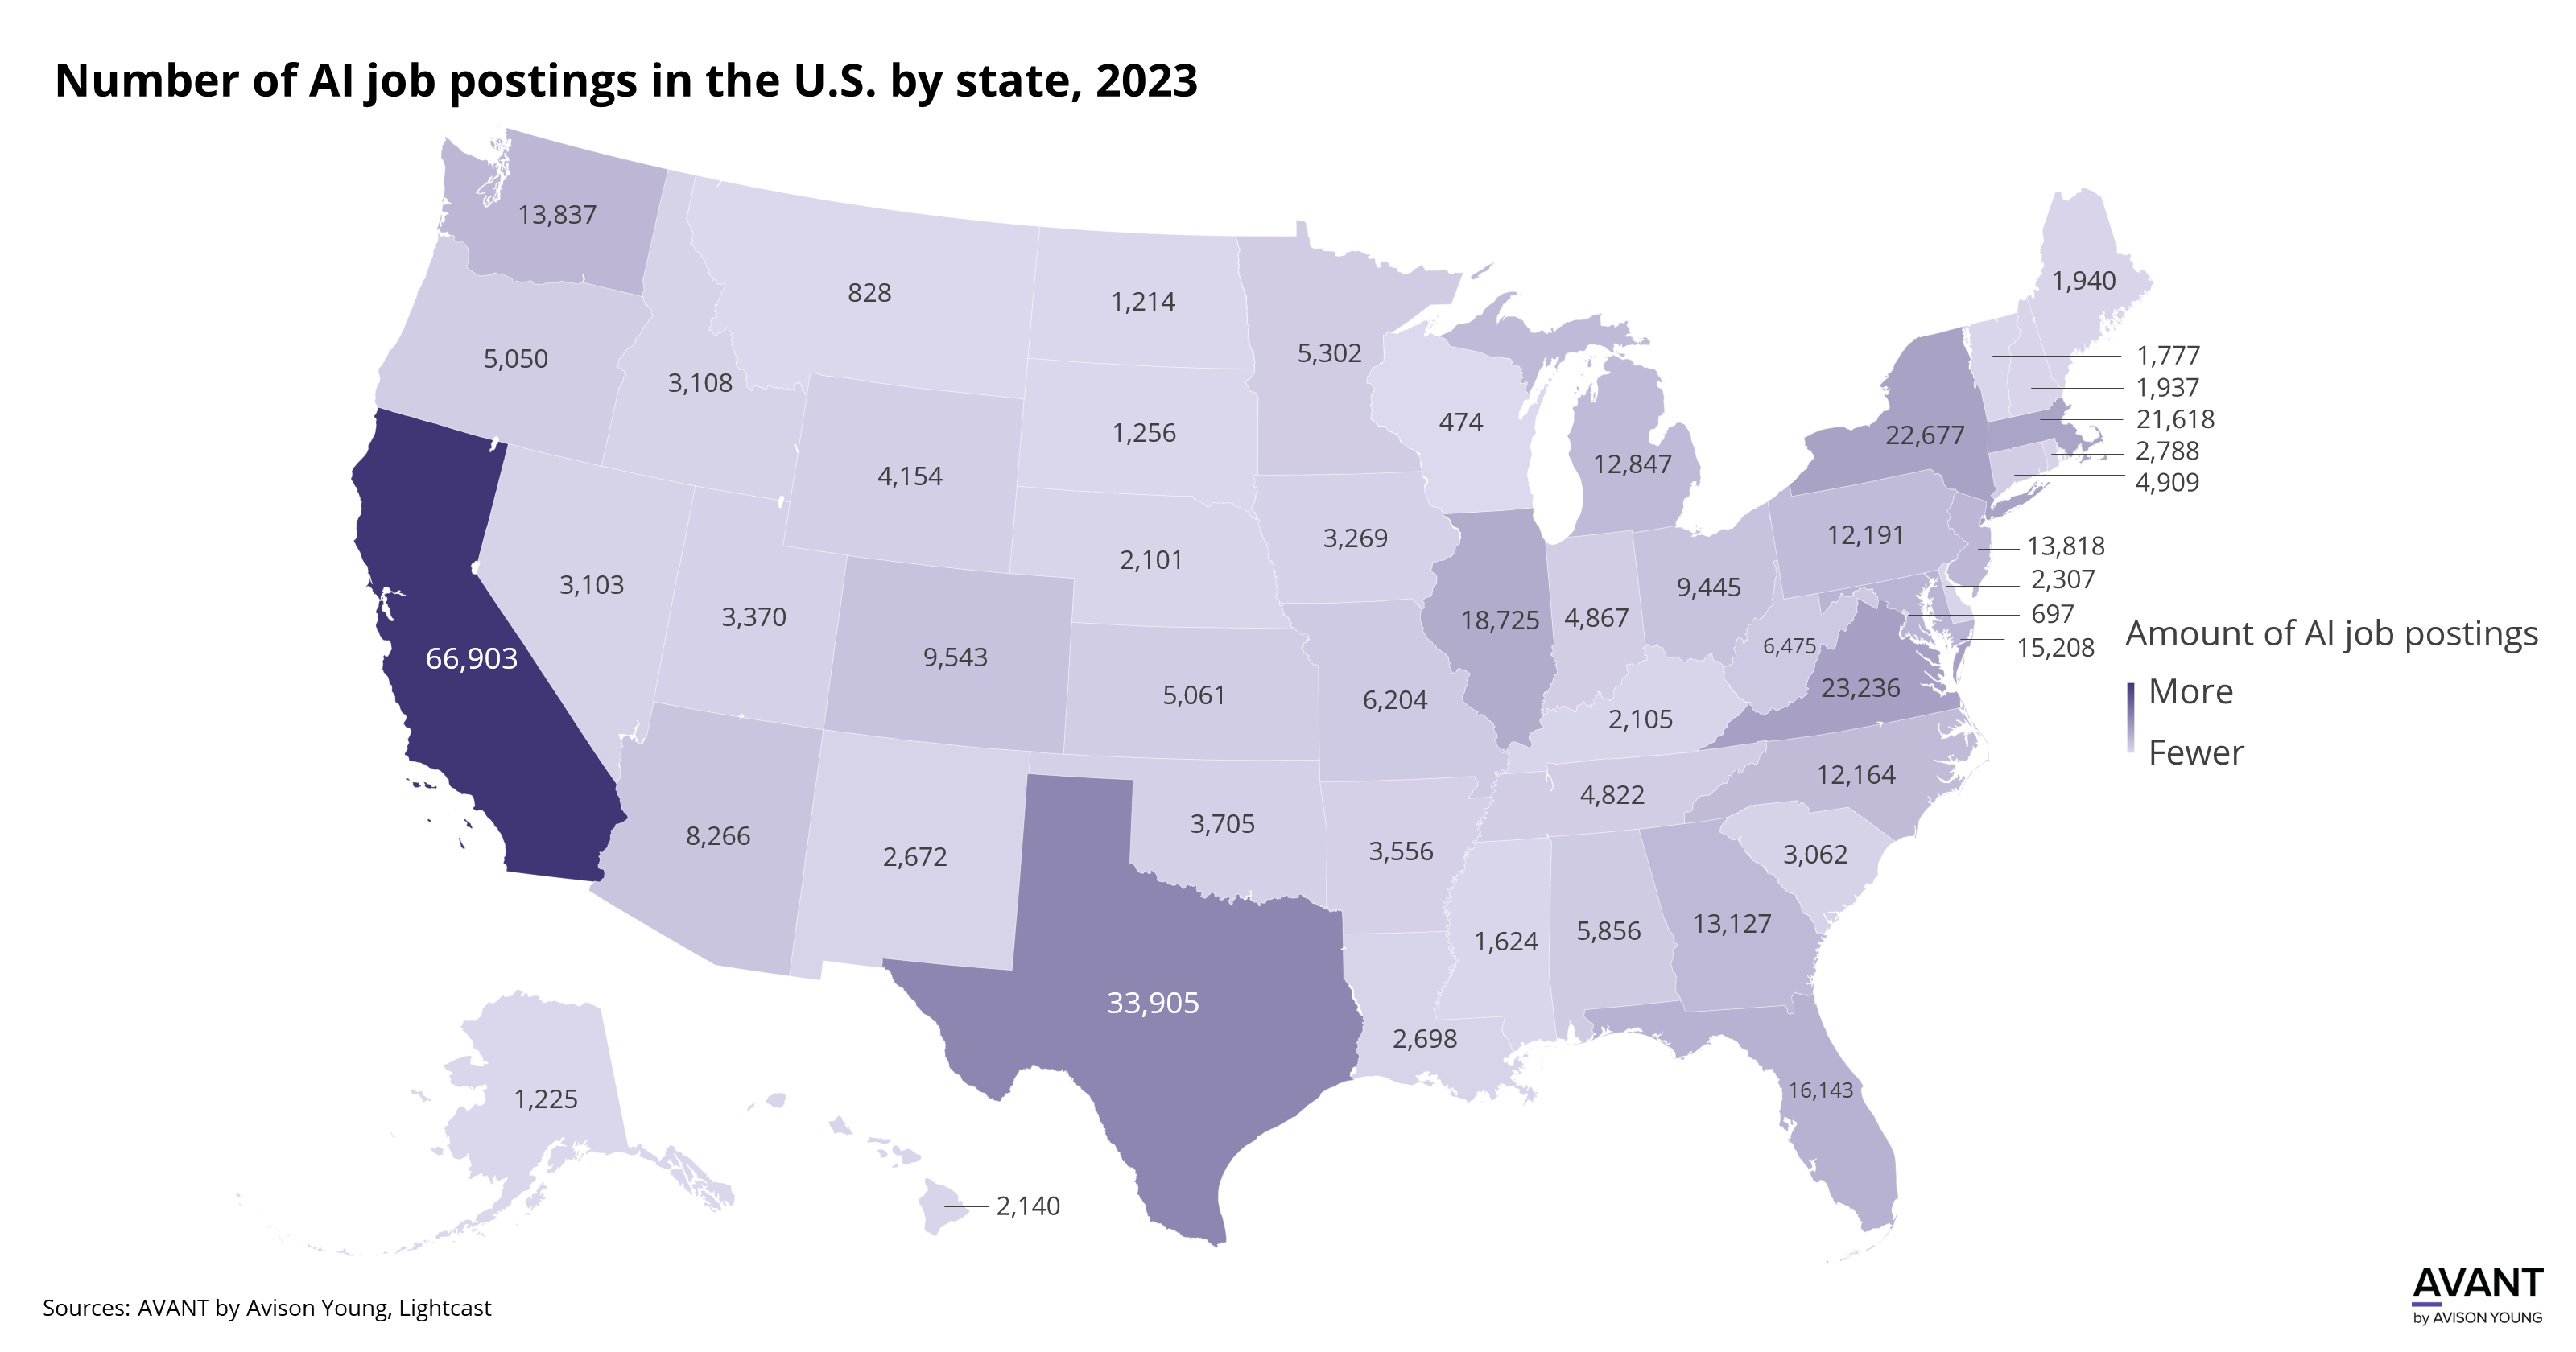 map of number of AI job postings in the U.S. by state in 2023